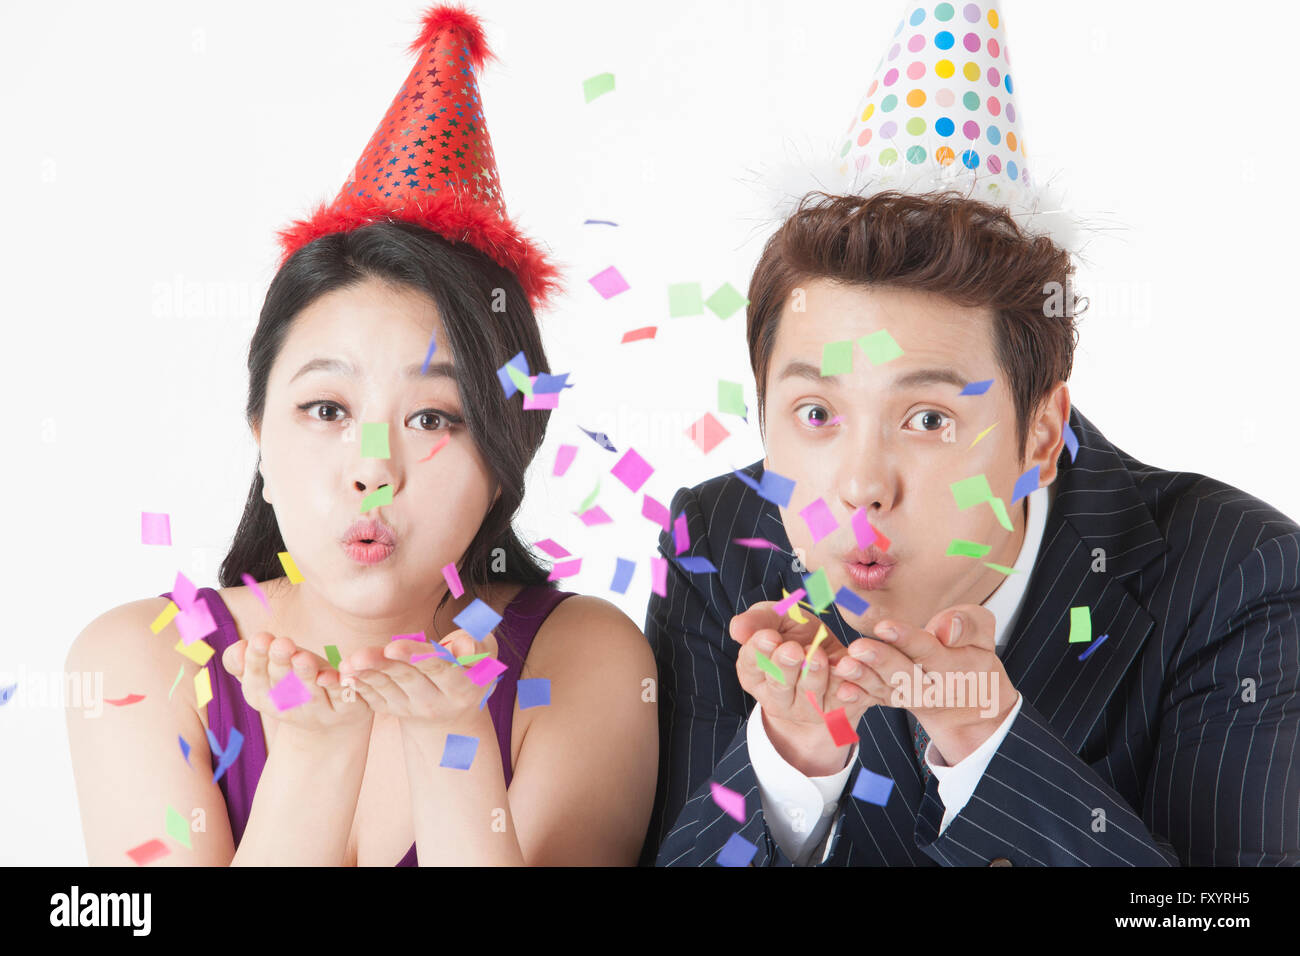 Portrait of young woman and a young man blowing confetti Stock Photo